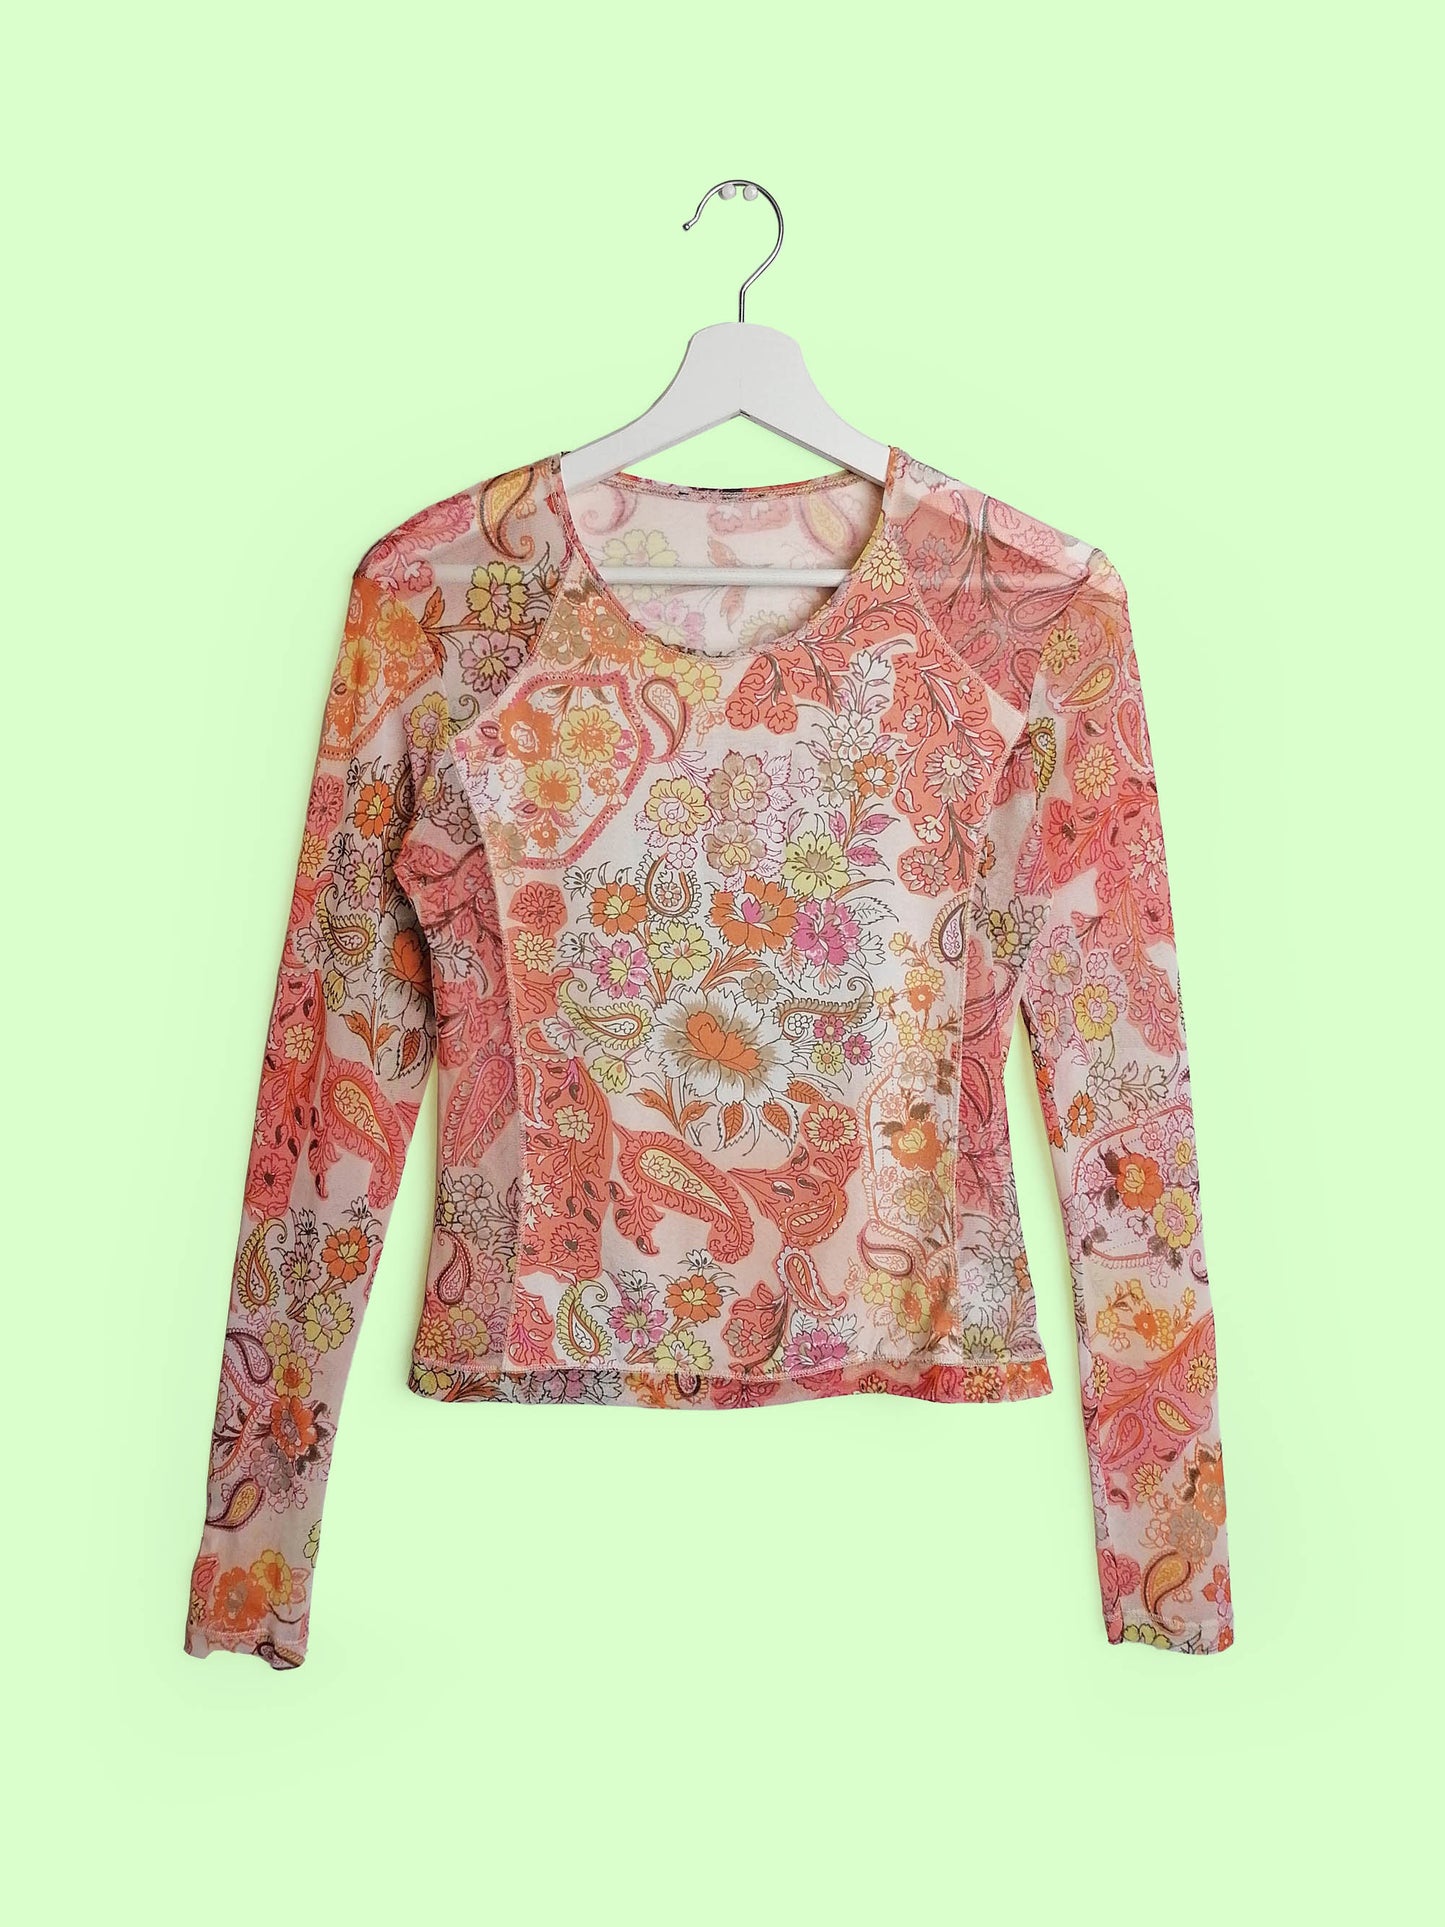 Micro-Mesh Top Floral Print - size S